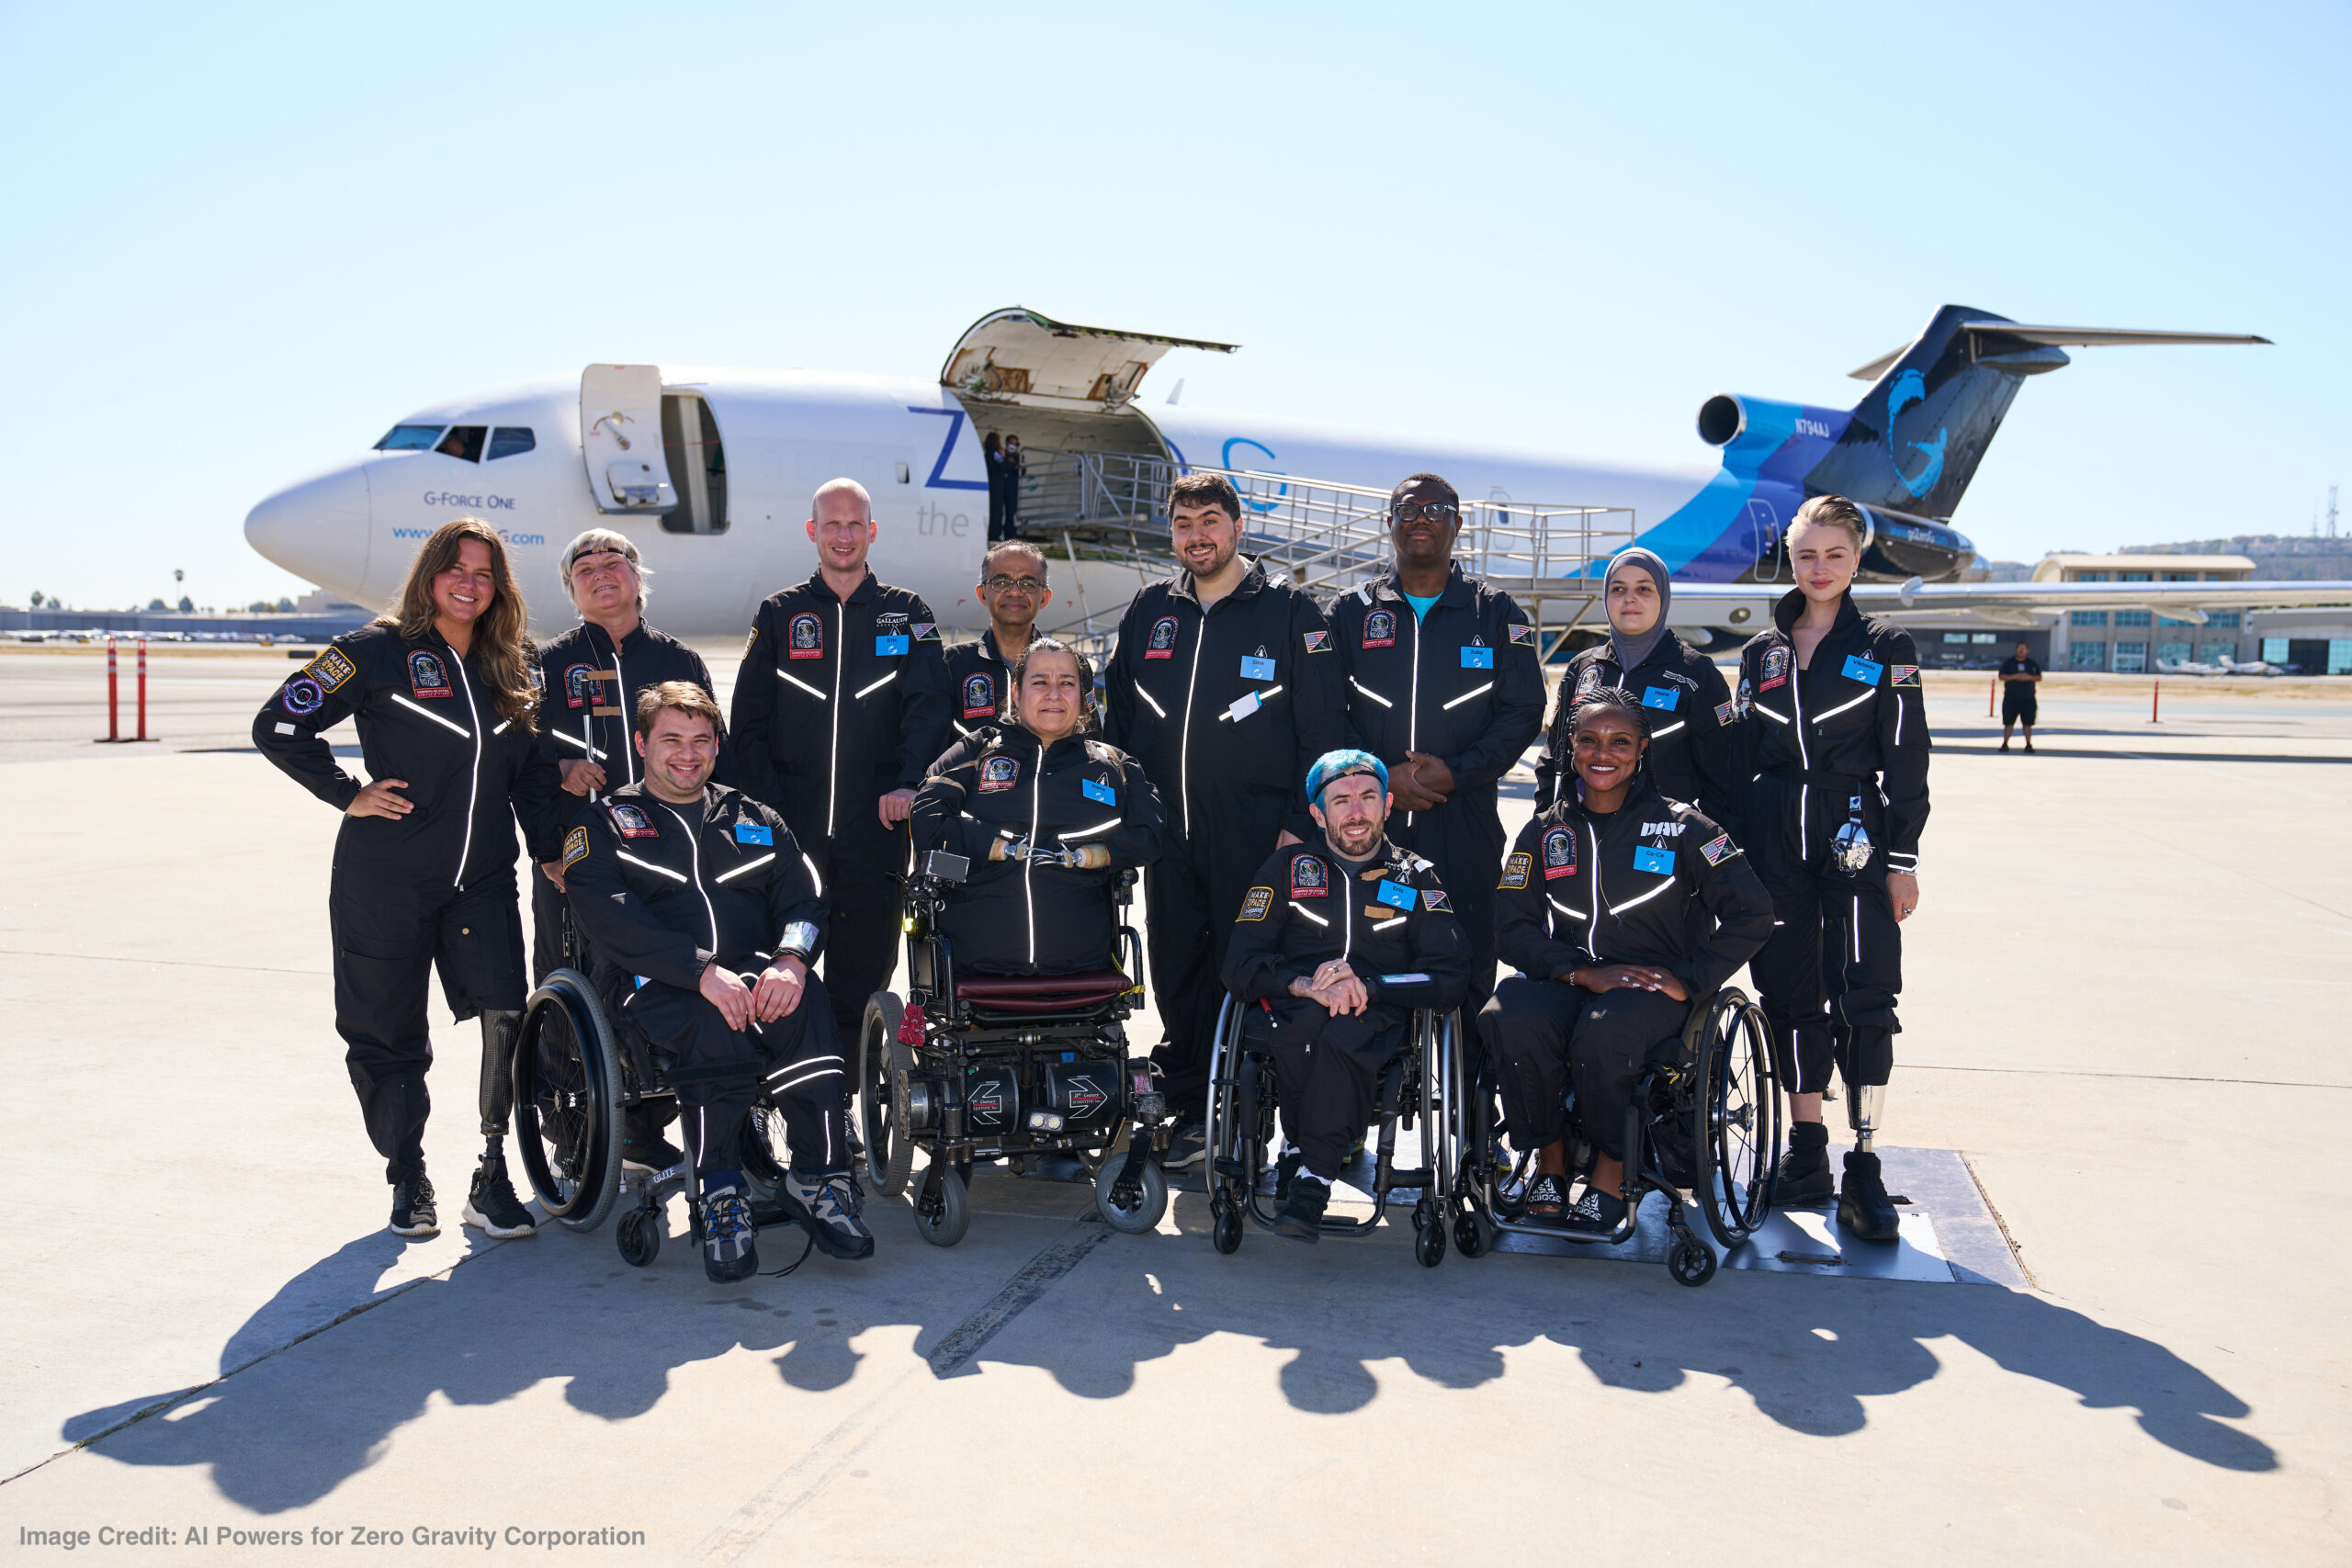 Featured image for “AstroAccess Successfully Completes ZERO-G Parabolic Flight with Crew of 12 Disability Ambassadors”